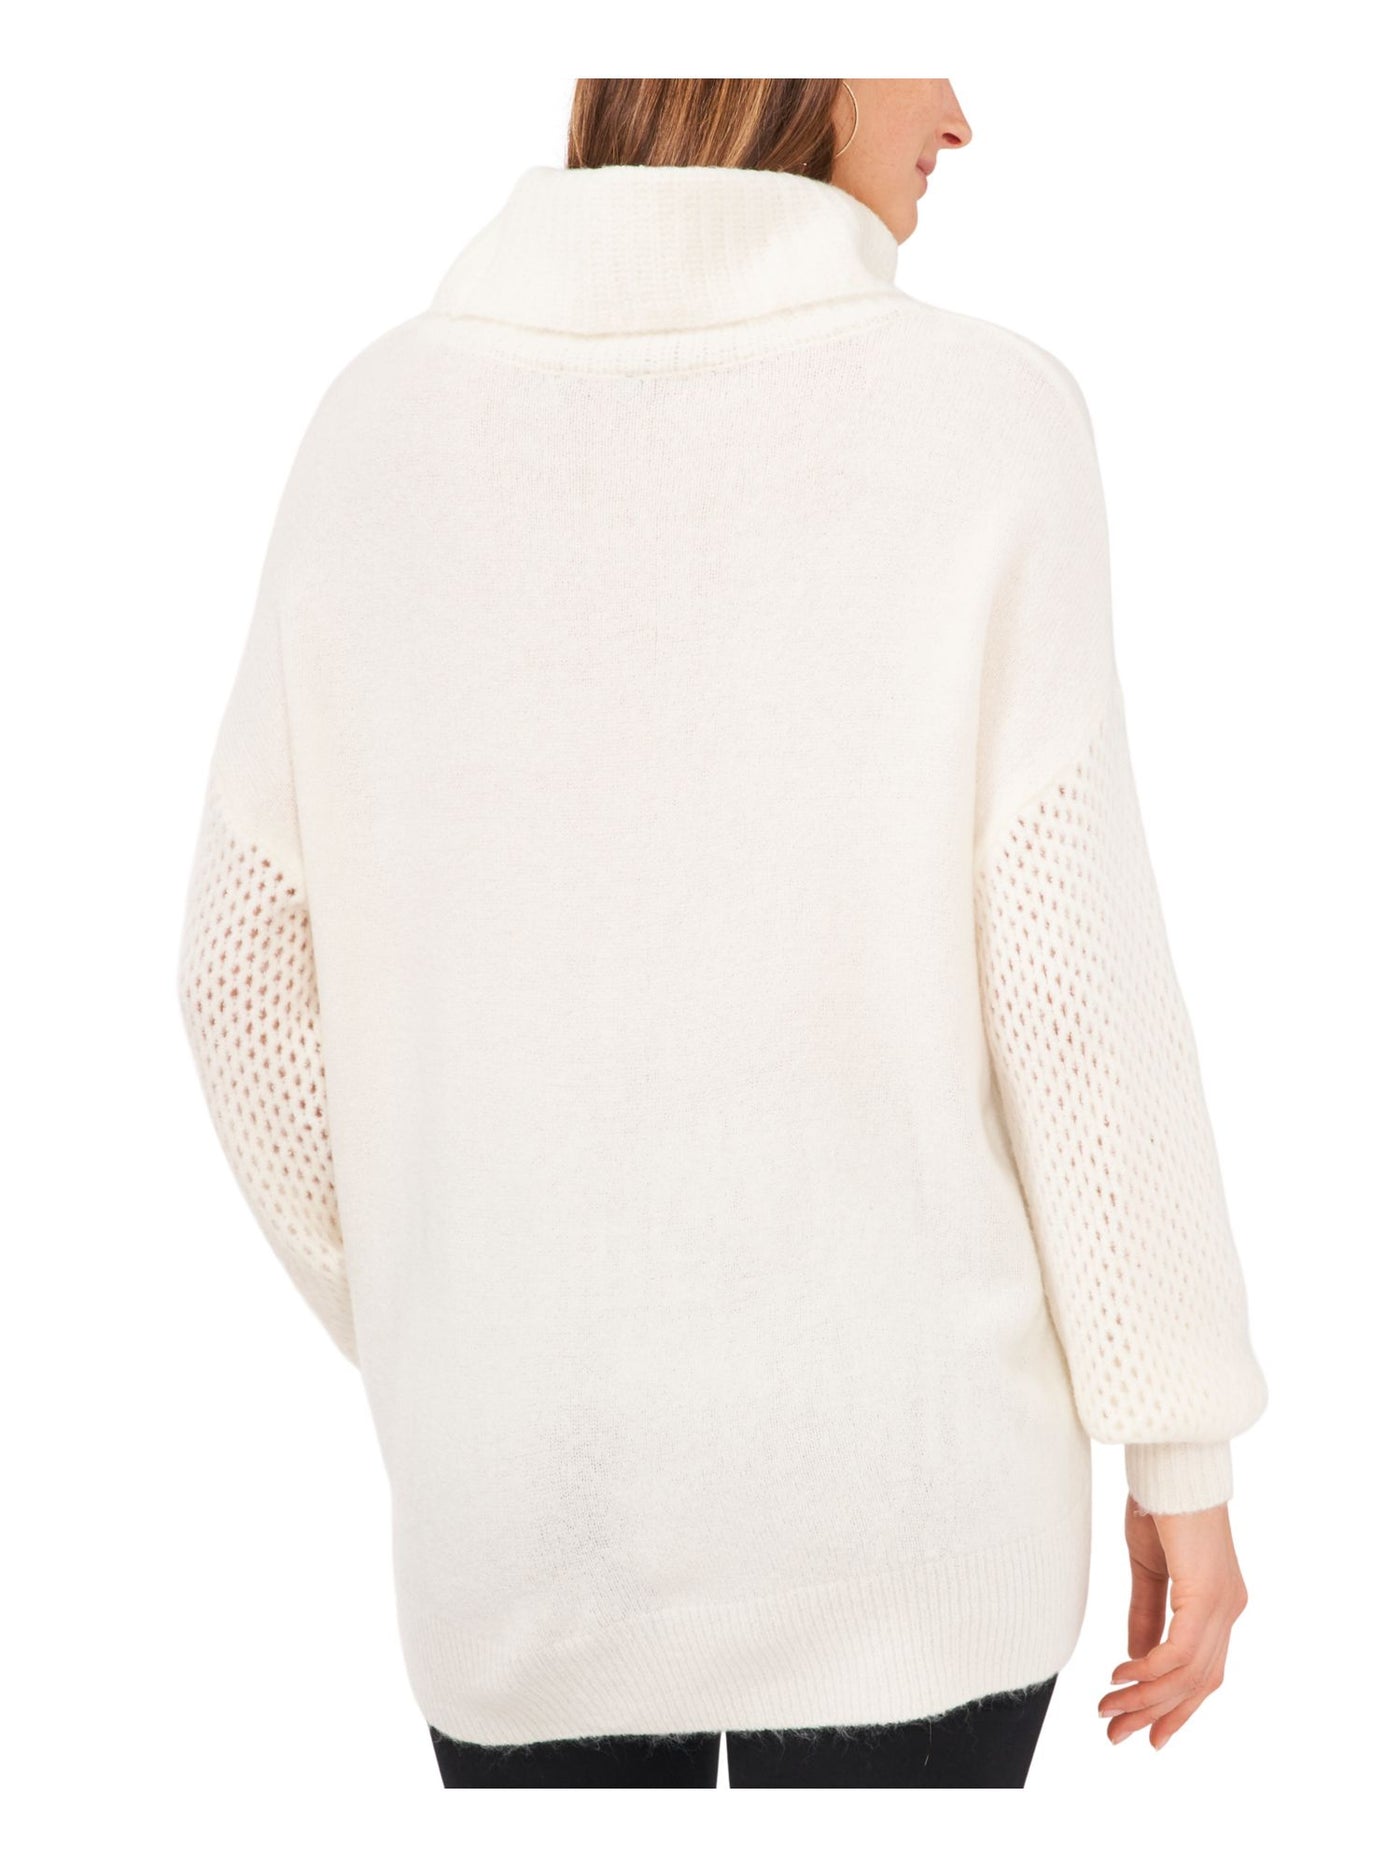 VINCE CAMUTO Womens Ivory Turtle Neck Wear To Work Sweater XL